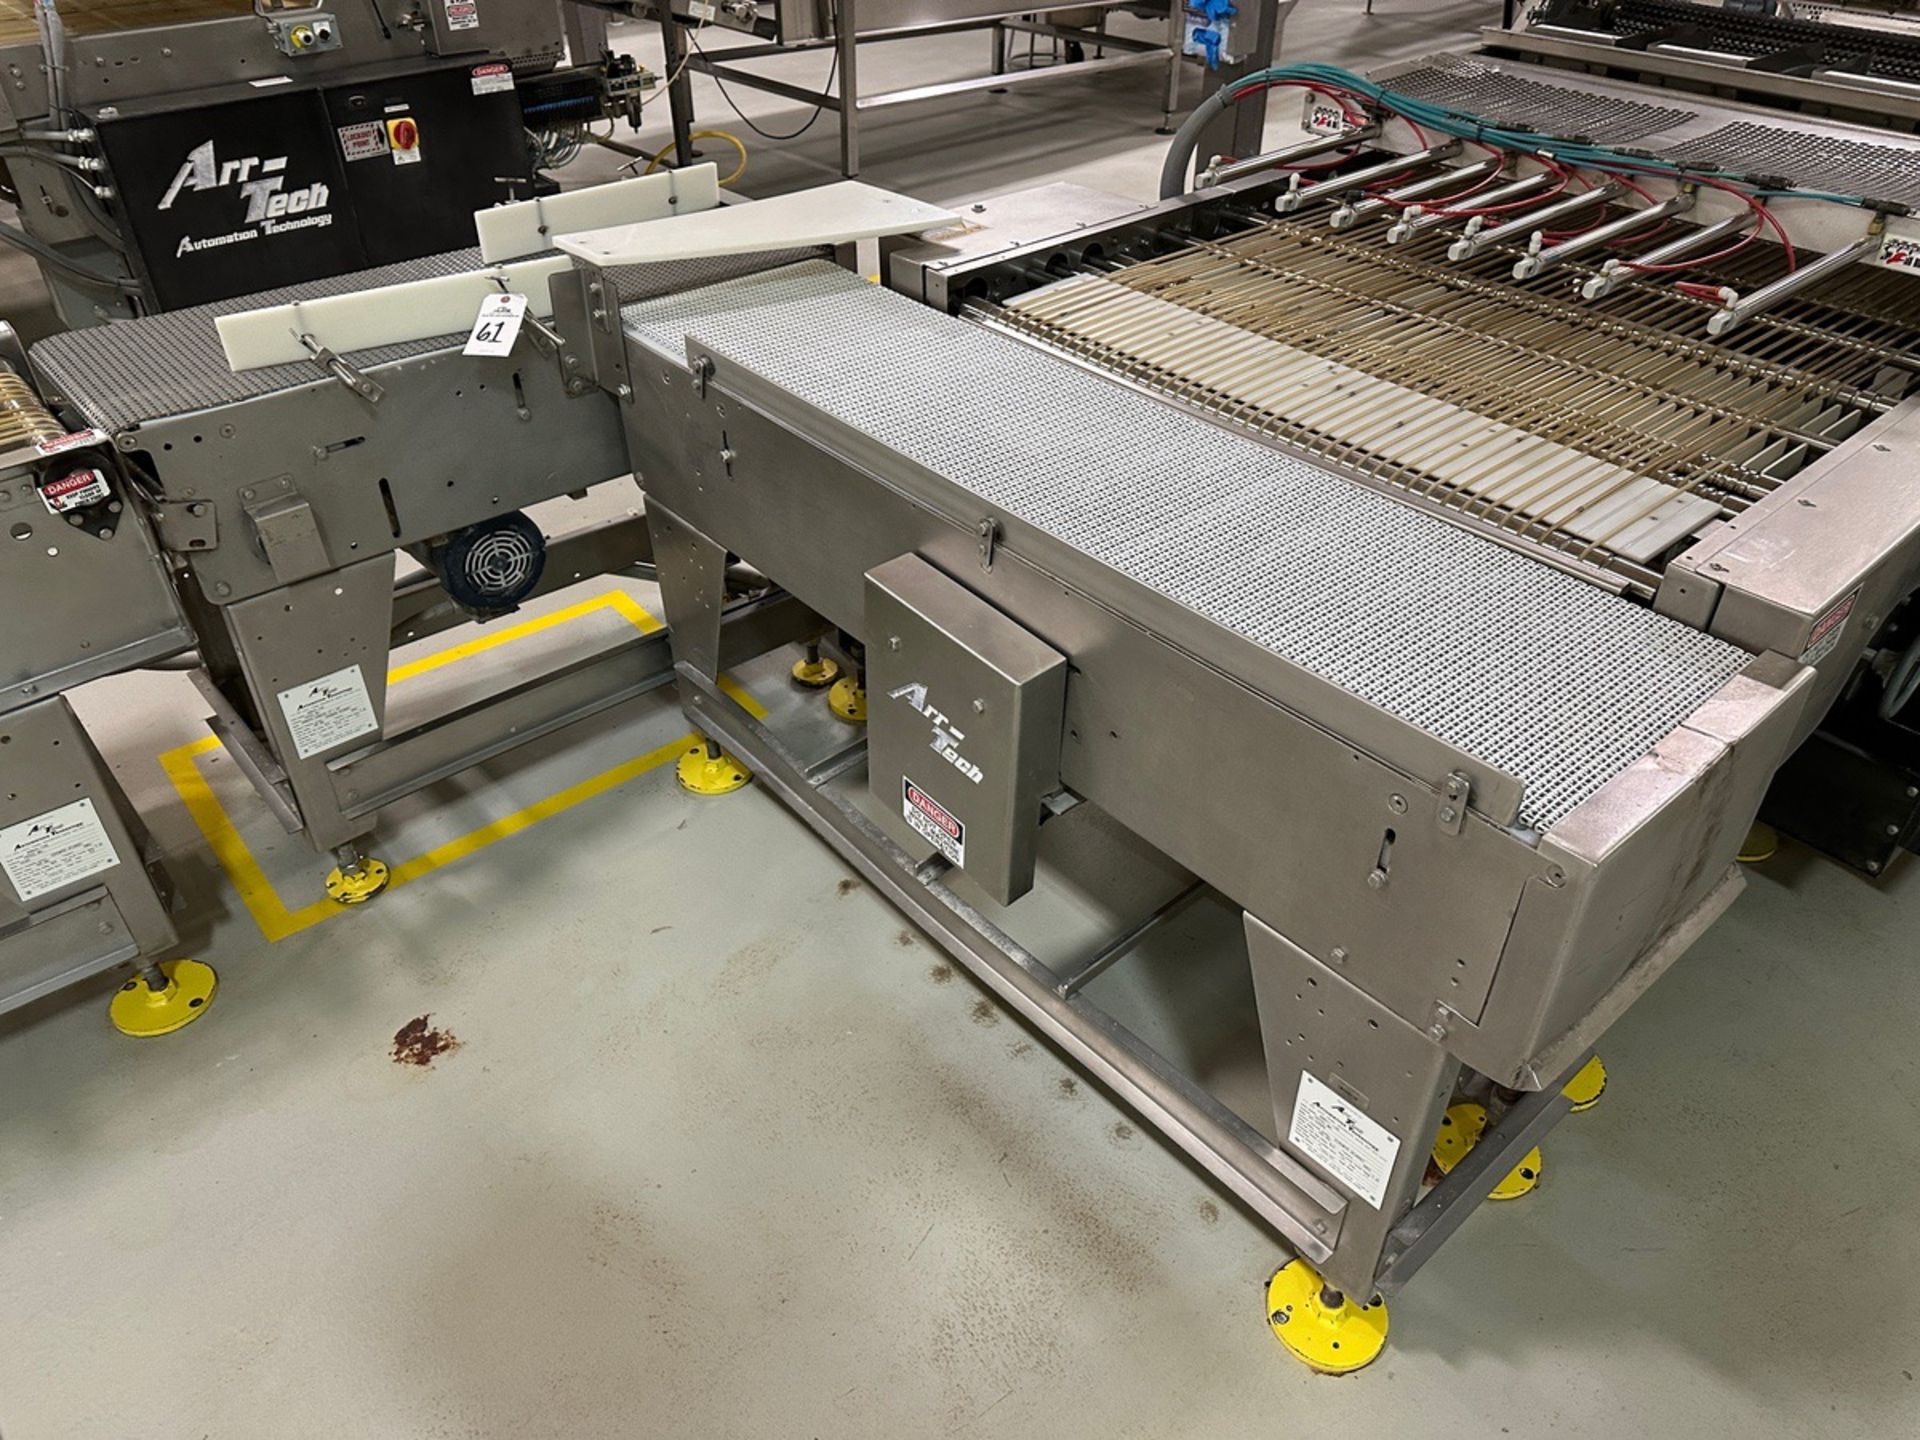 Lot of (2) Arr-Tech Intralox Belt over Stainless Steel Conveyors (Approx. 16" x 4' | Rig Fee $150